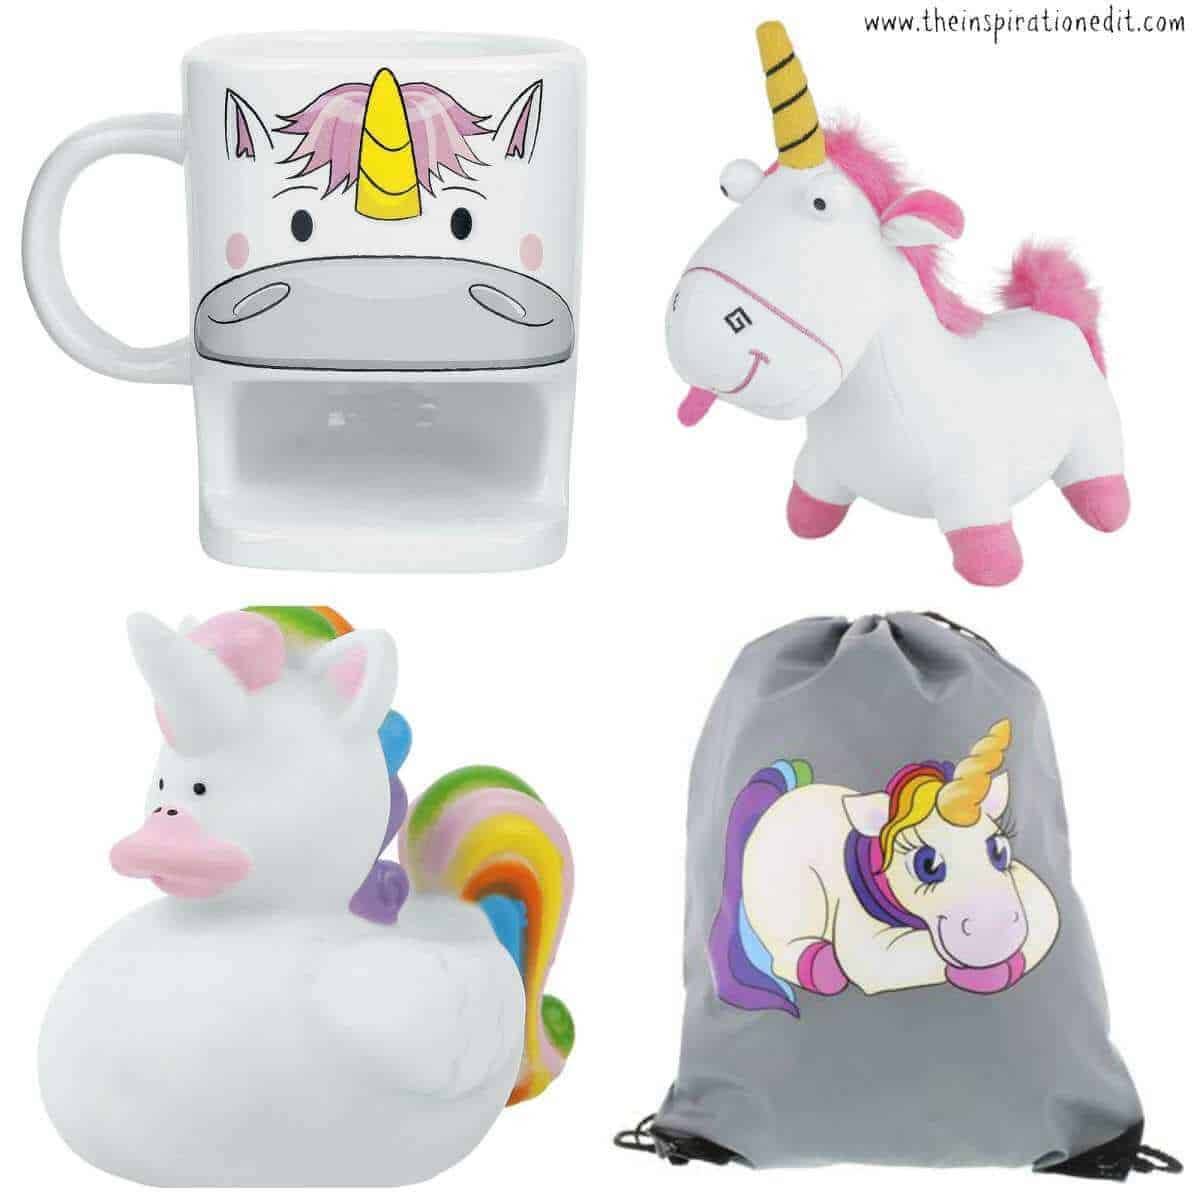 Unicorn Gifts For Child
 Funky Unicorn Gifts For Kids · The Inspiration Edit